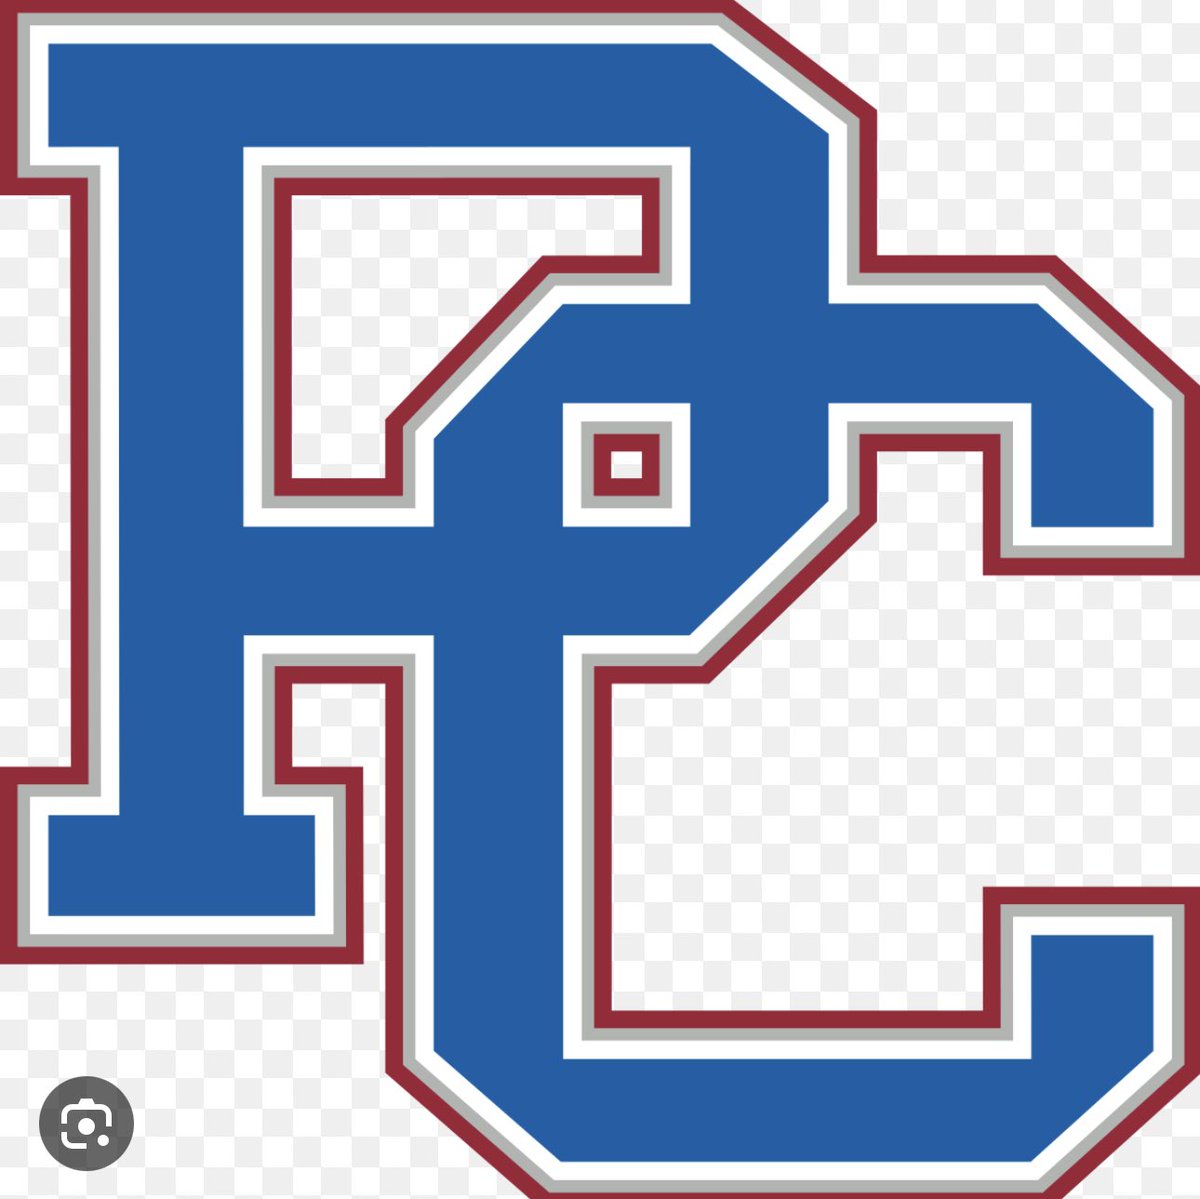 After a great conversation with @CoachASharp I’m very blessed to receive a D1 offer to Presbyterian College🤍💙. @ladystrong2024